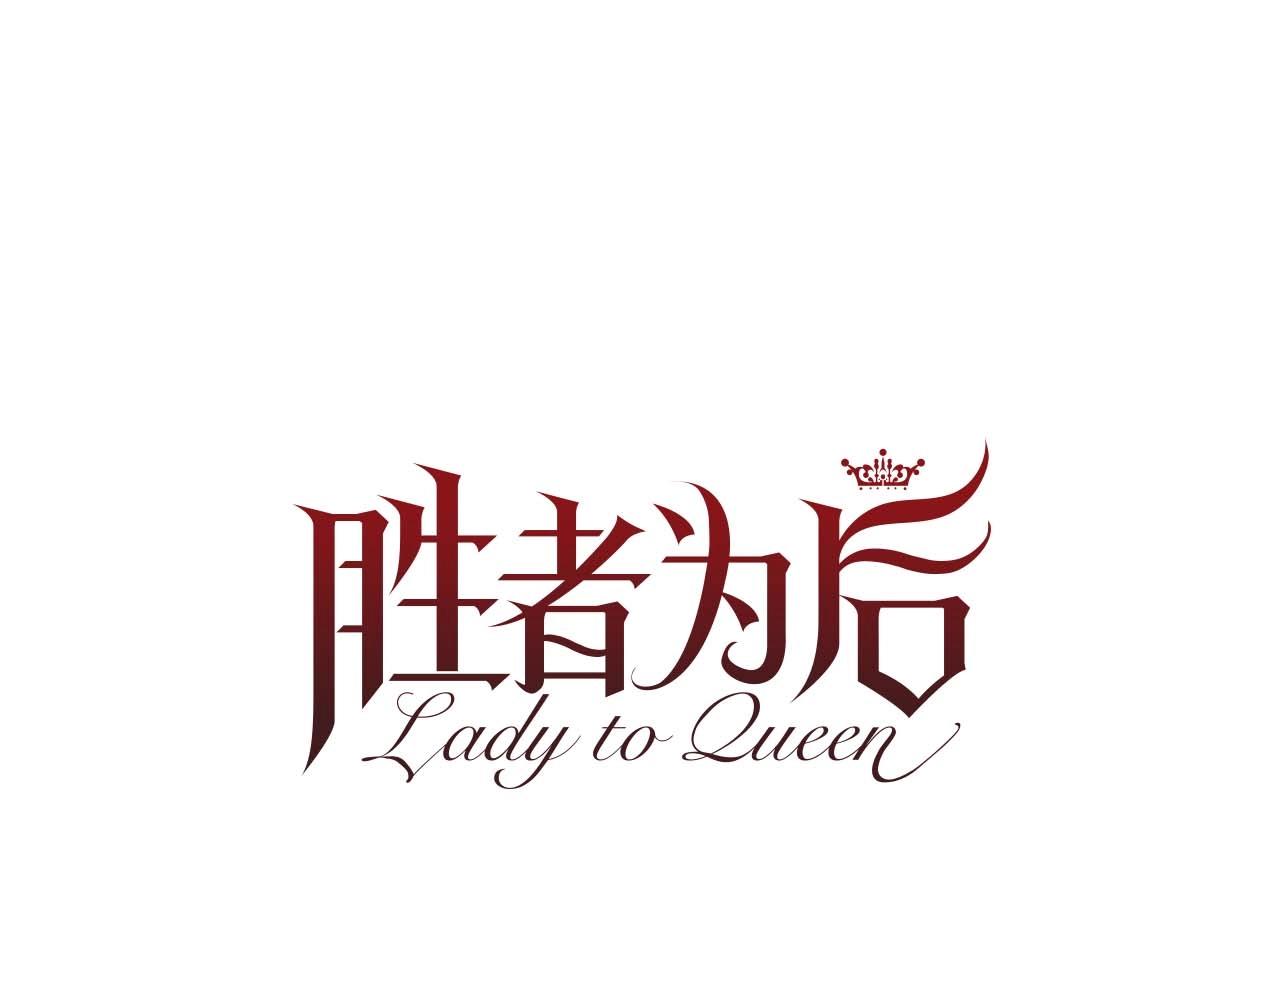 Lady to Queen-勝者爲後 - 第42話 強勢奪後(1/3) - 1